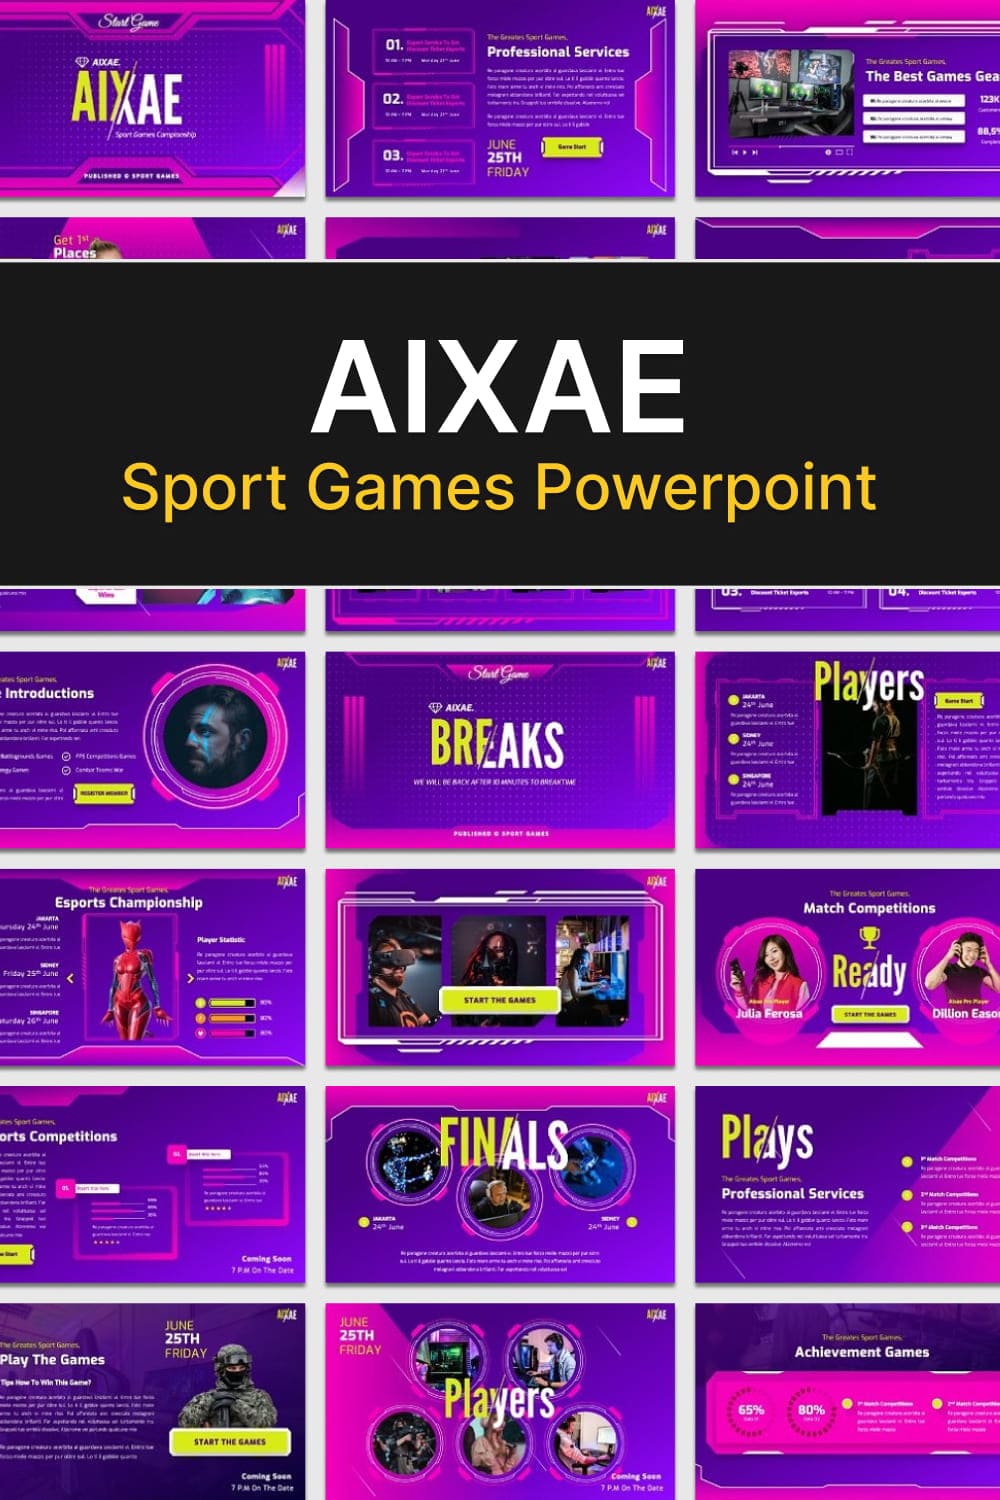 Aixae sport games powerpoint, picture for pinterest 1000x1500.